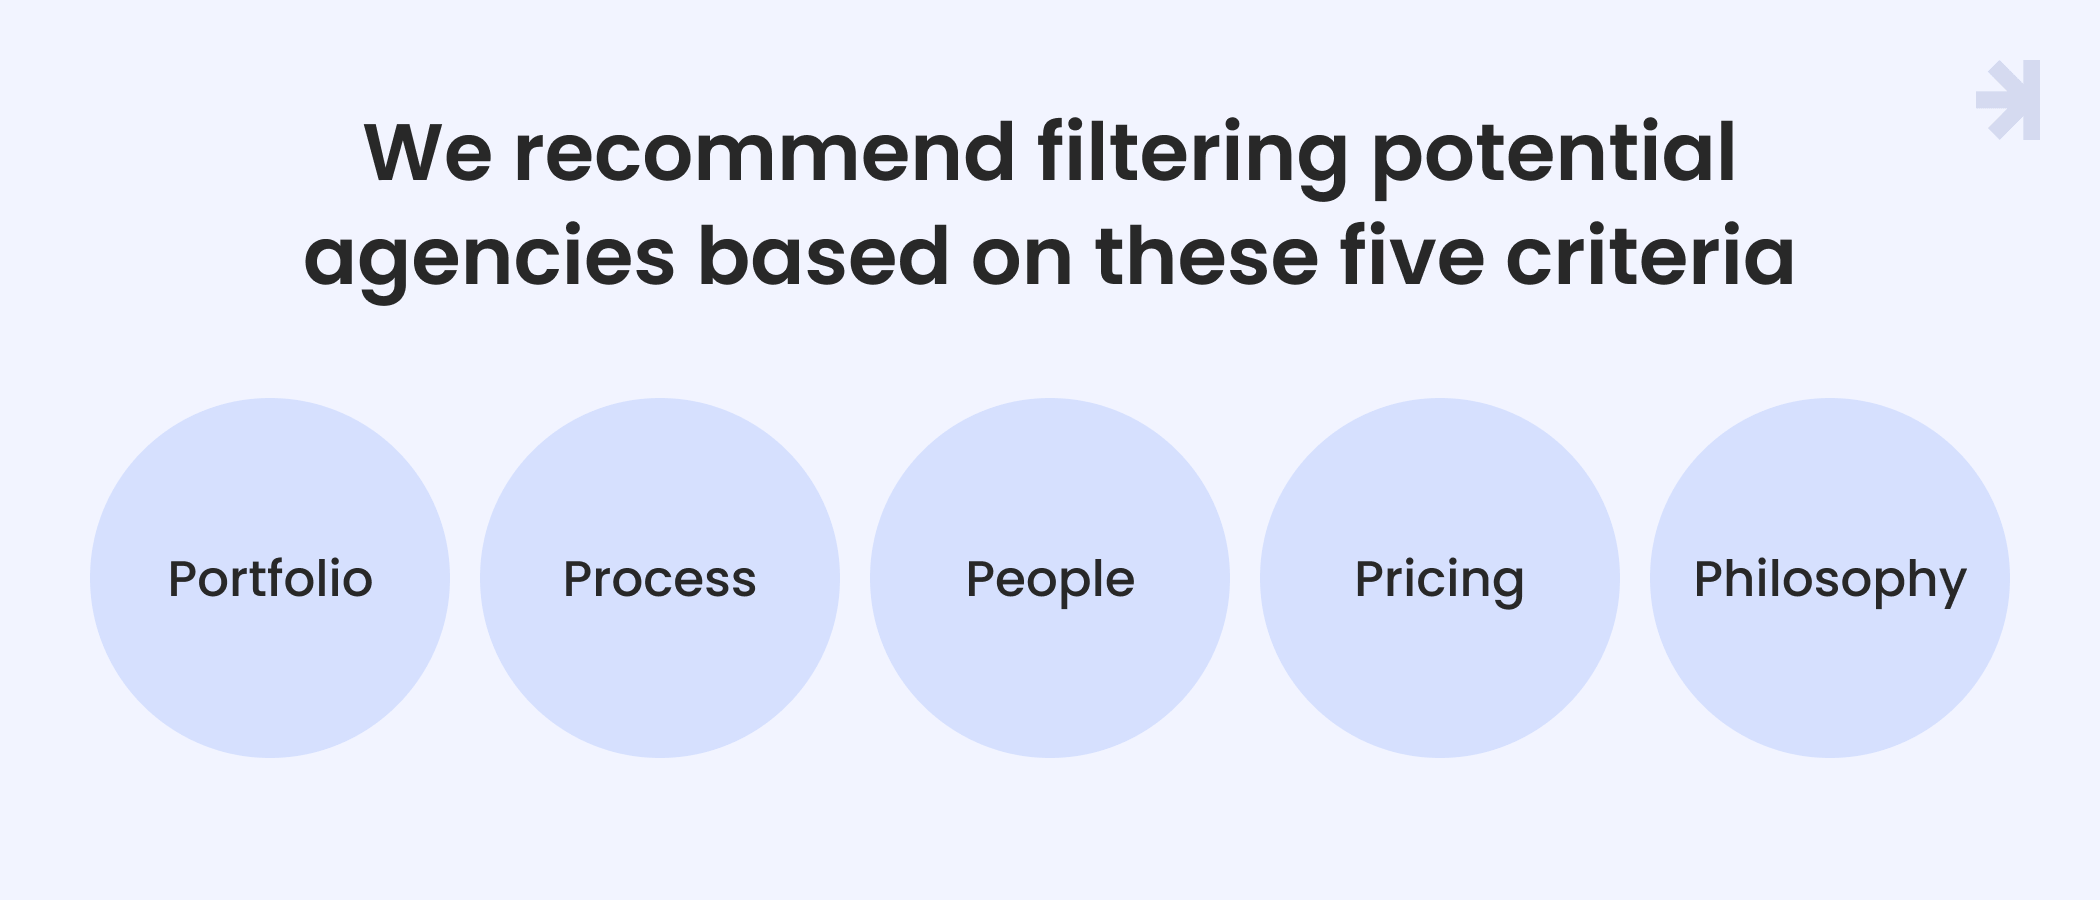 To facilitate this process, we recommend filtering potential agencies based on these five criteria: